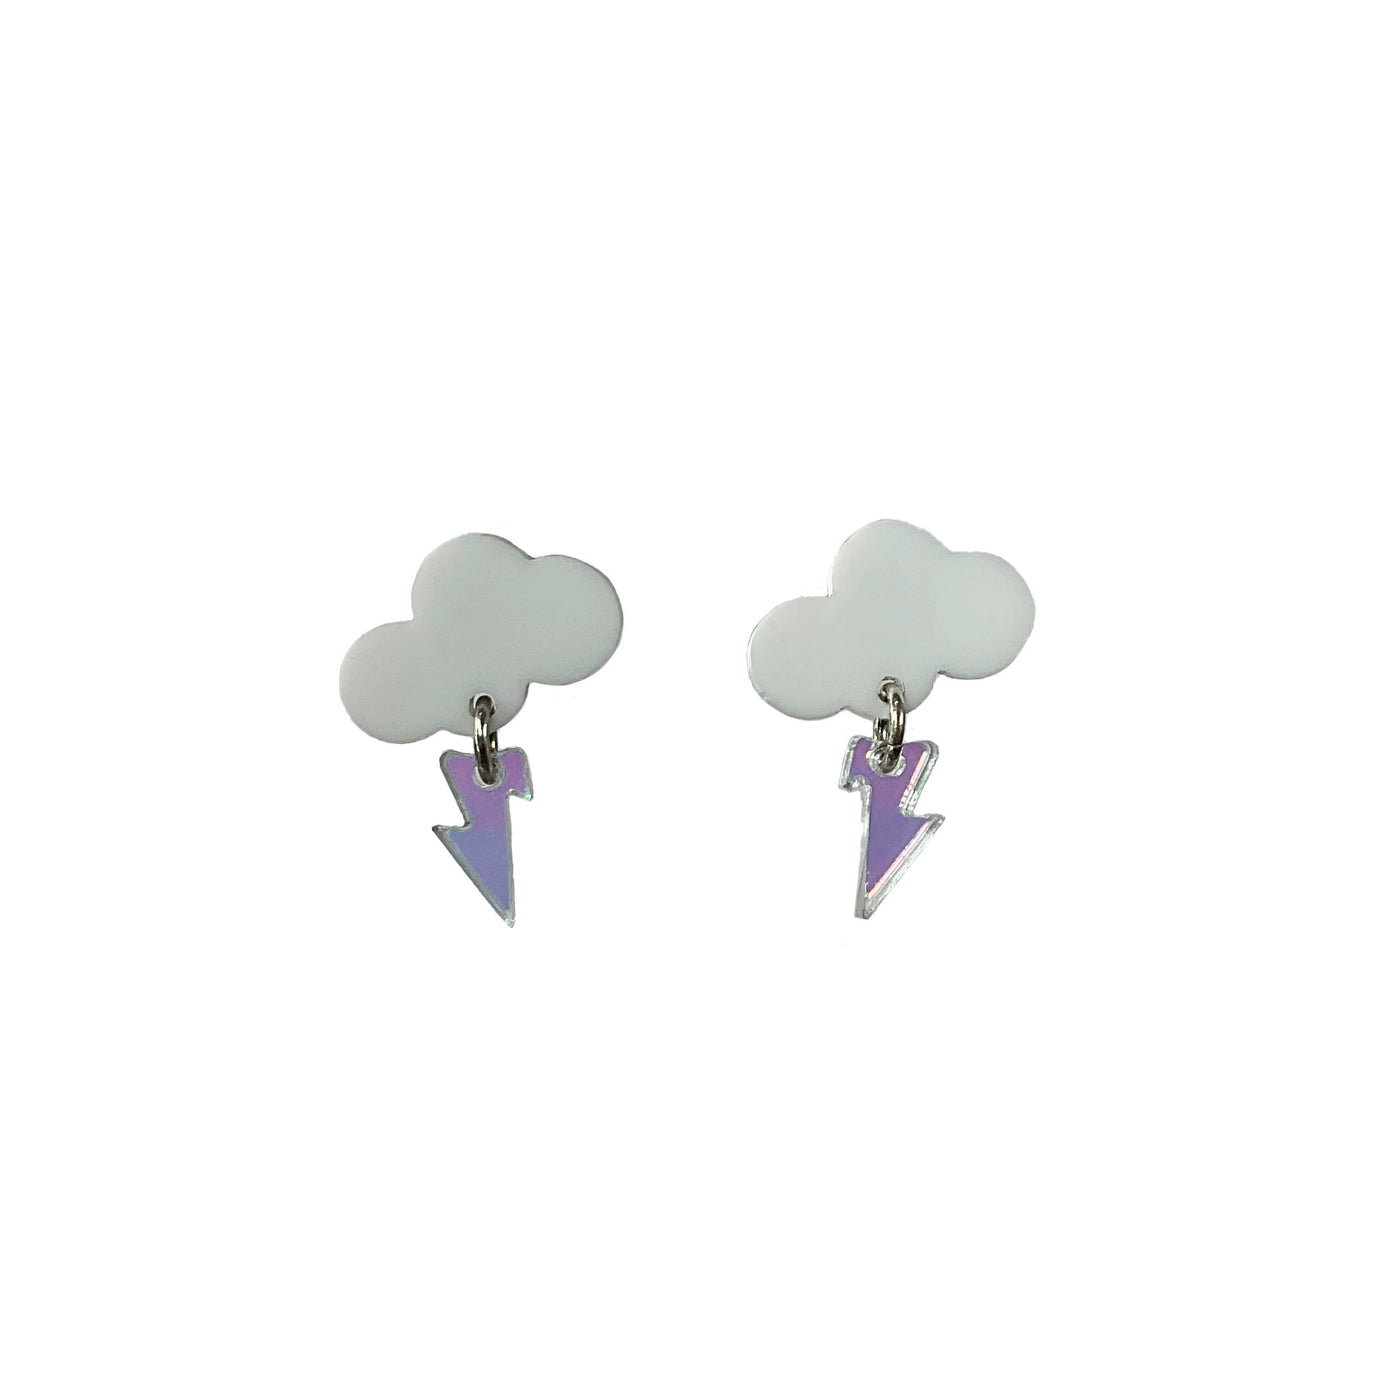 Small, solid white cloud earrings with an iridescent bolt on a white background. 